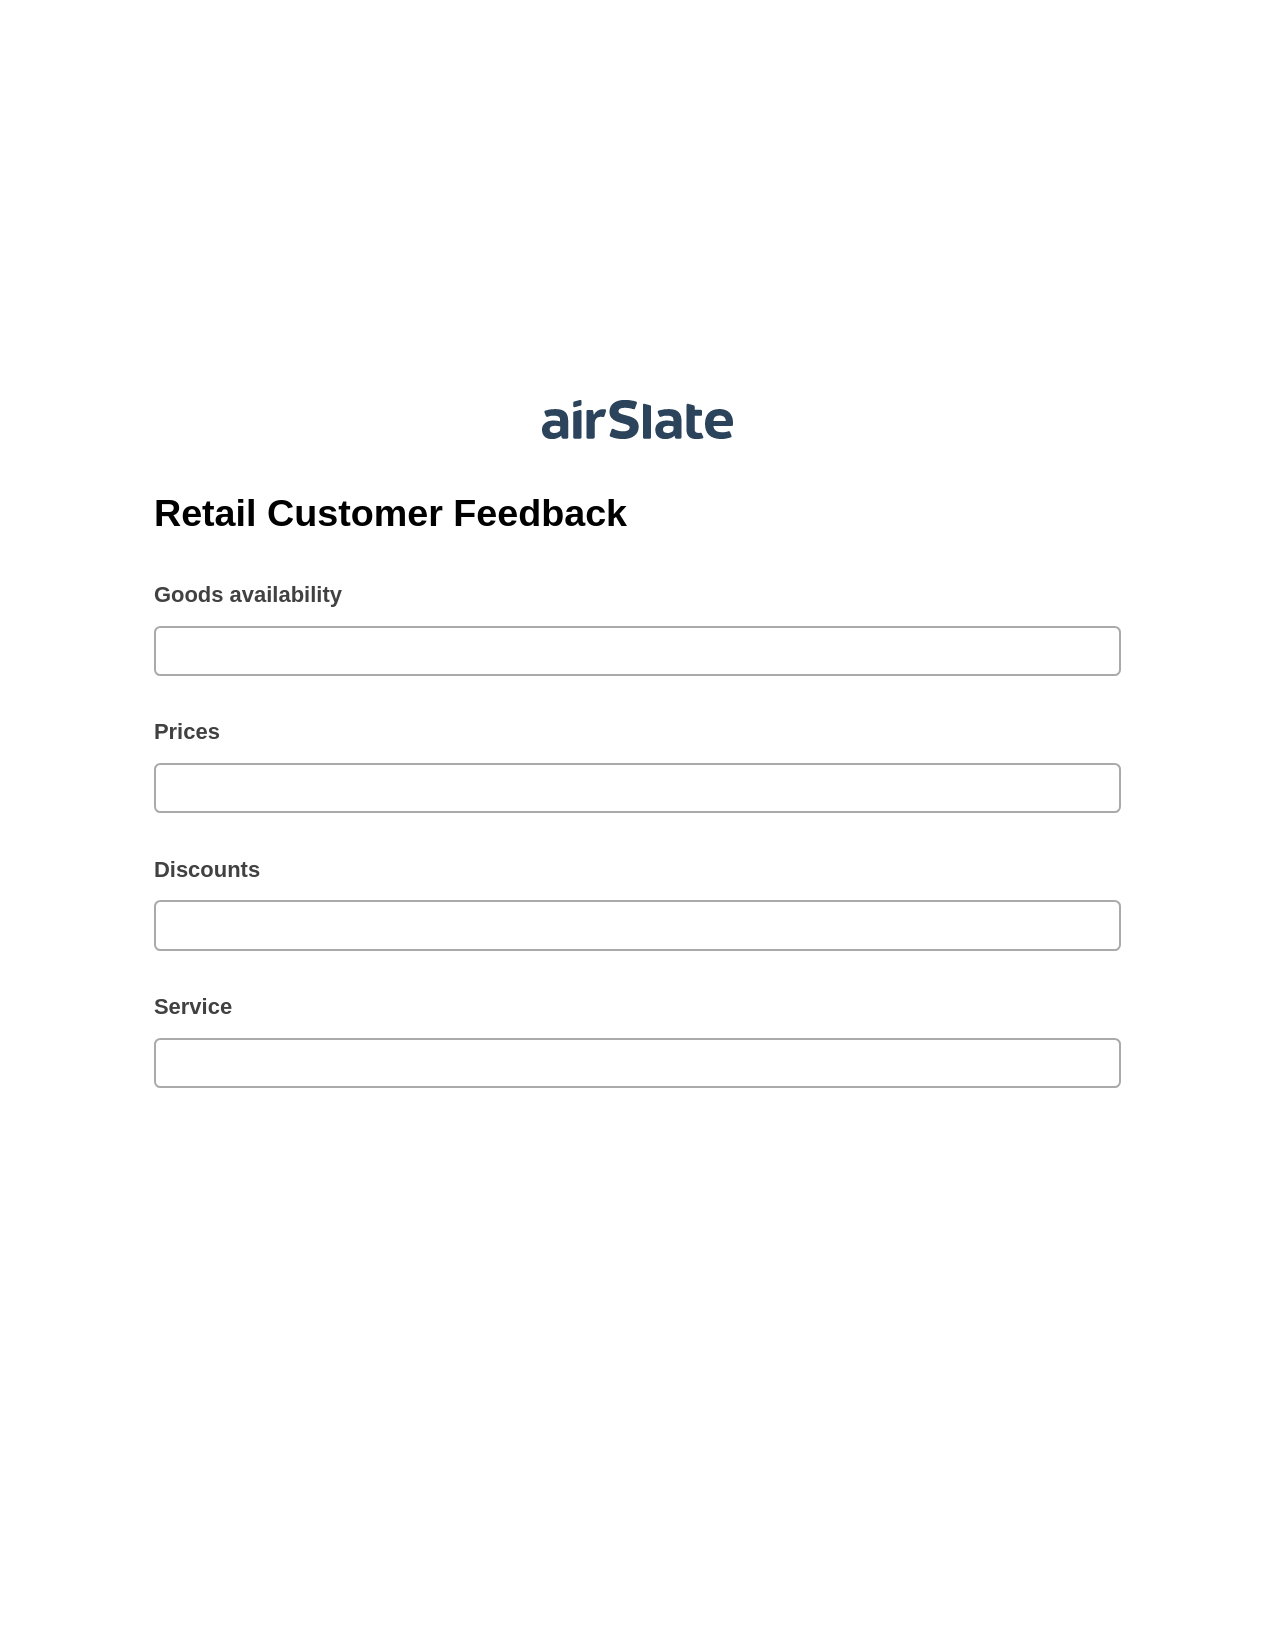 Retail Customer Feedback Pre-fill Dropdowns from Google Sheet Bot, Export to MS Dynamics 365 Bot, Post-finish Document Bot